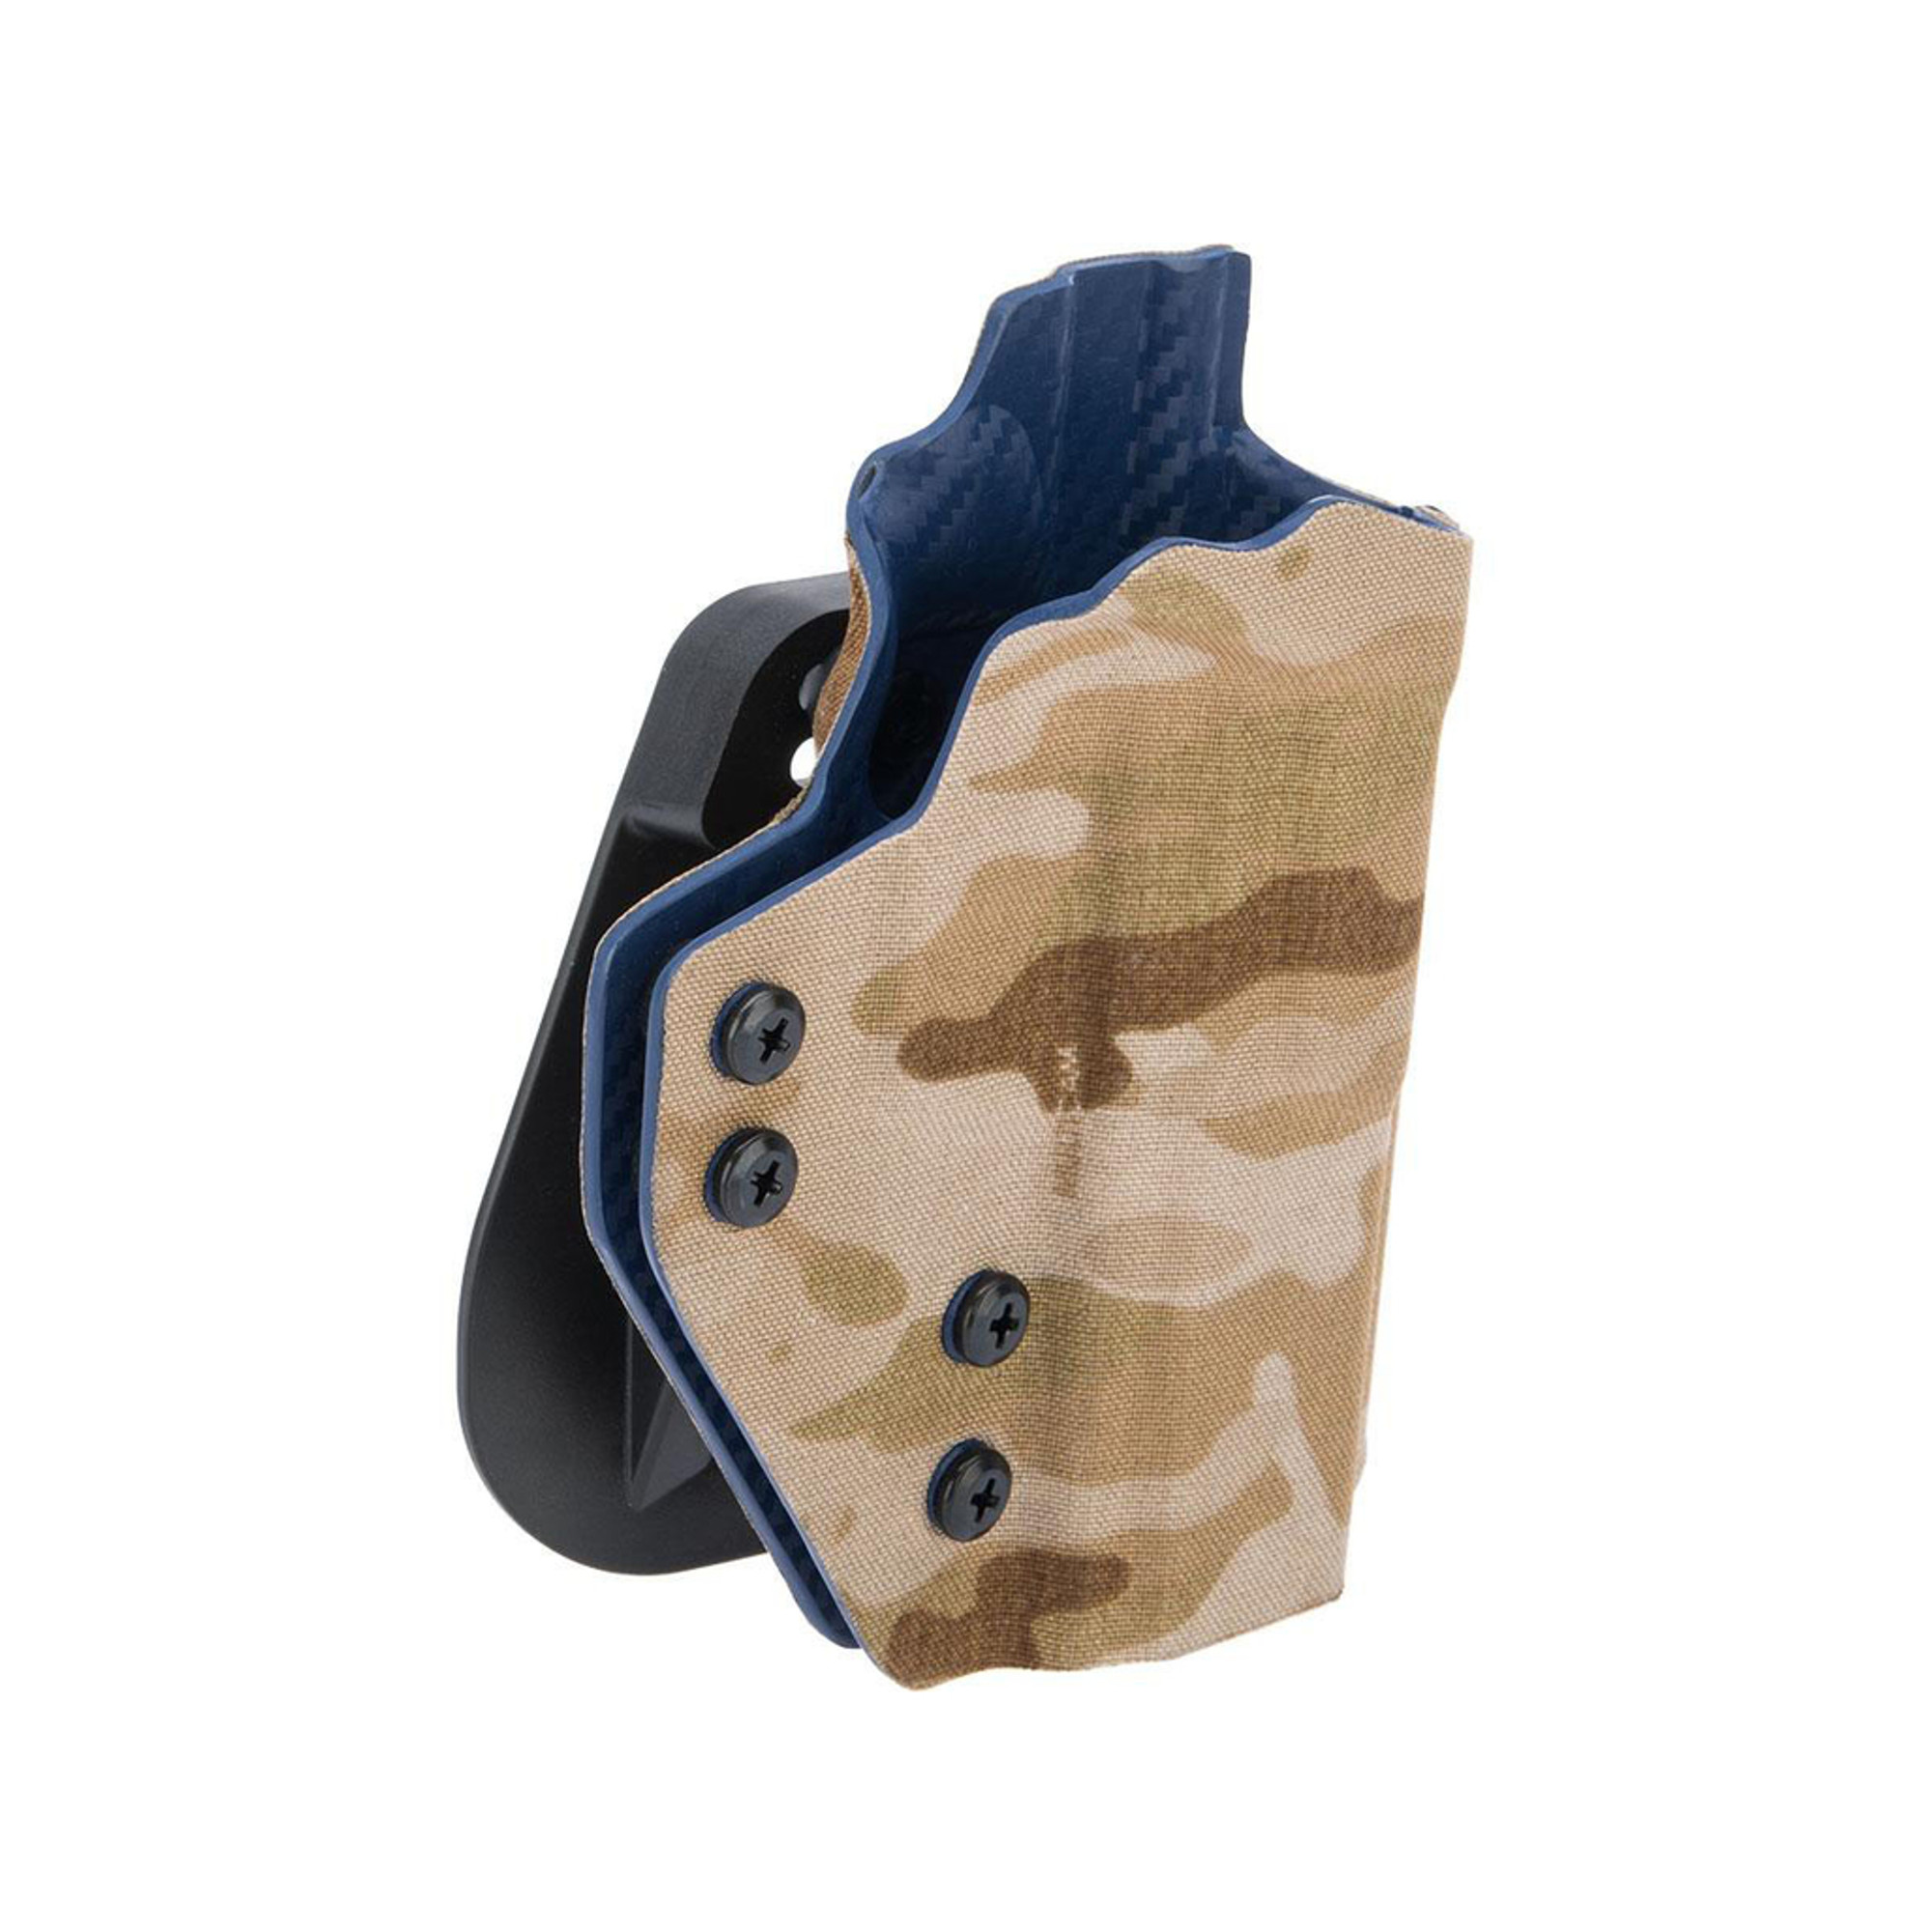 QVO Tactical "Secondary" OWB Kydex Holster for EMG Archon Type B Series (Color: Multicam Arid)